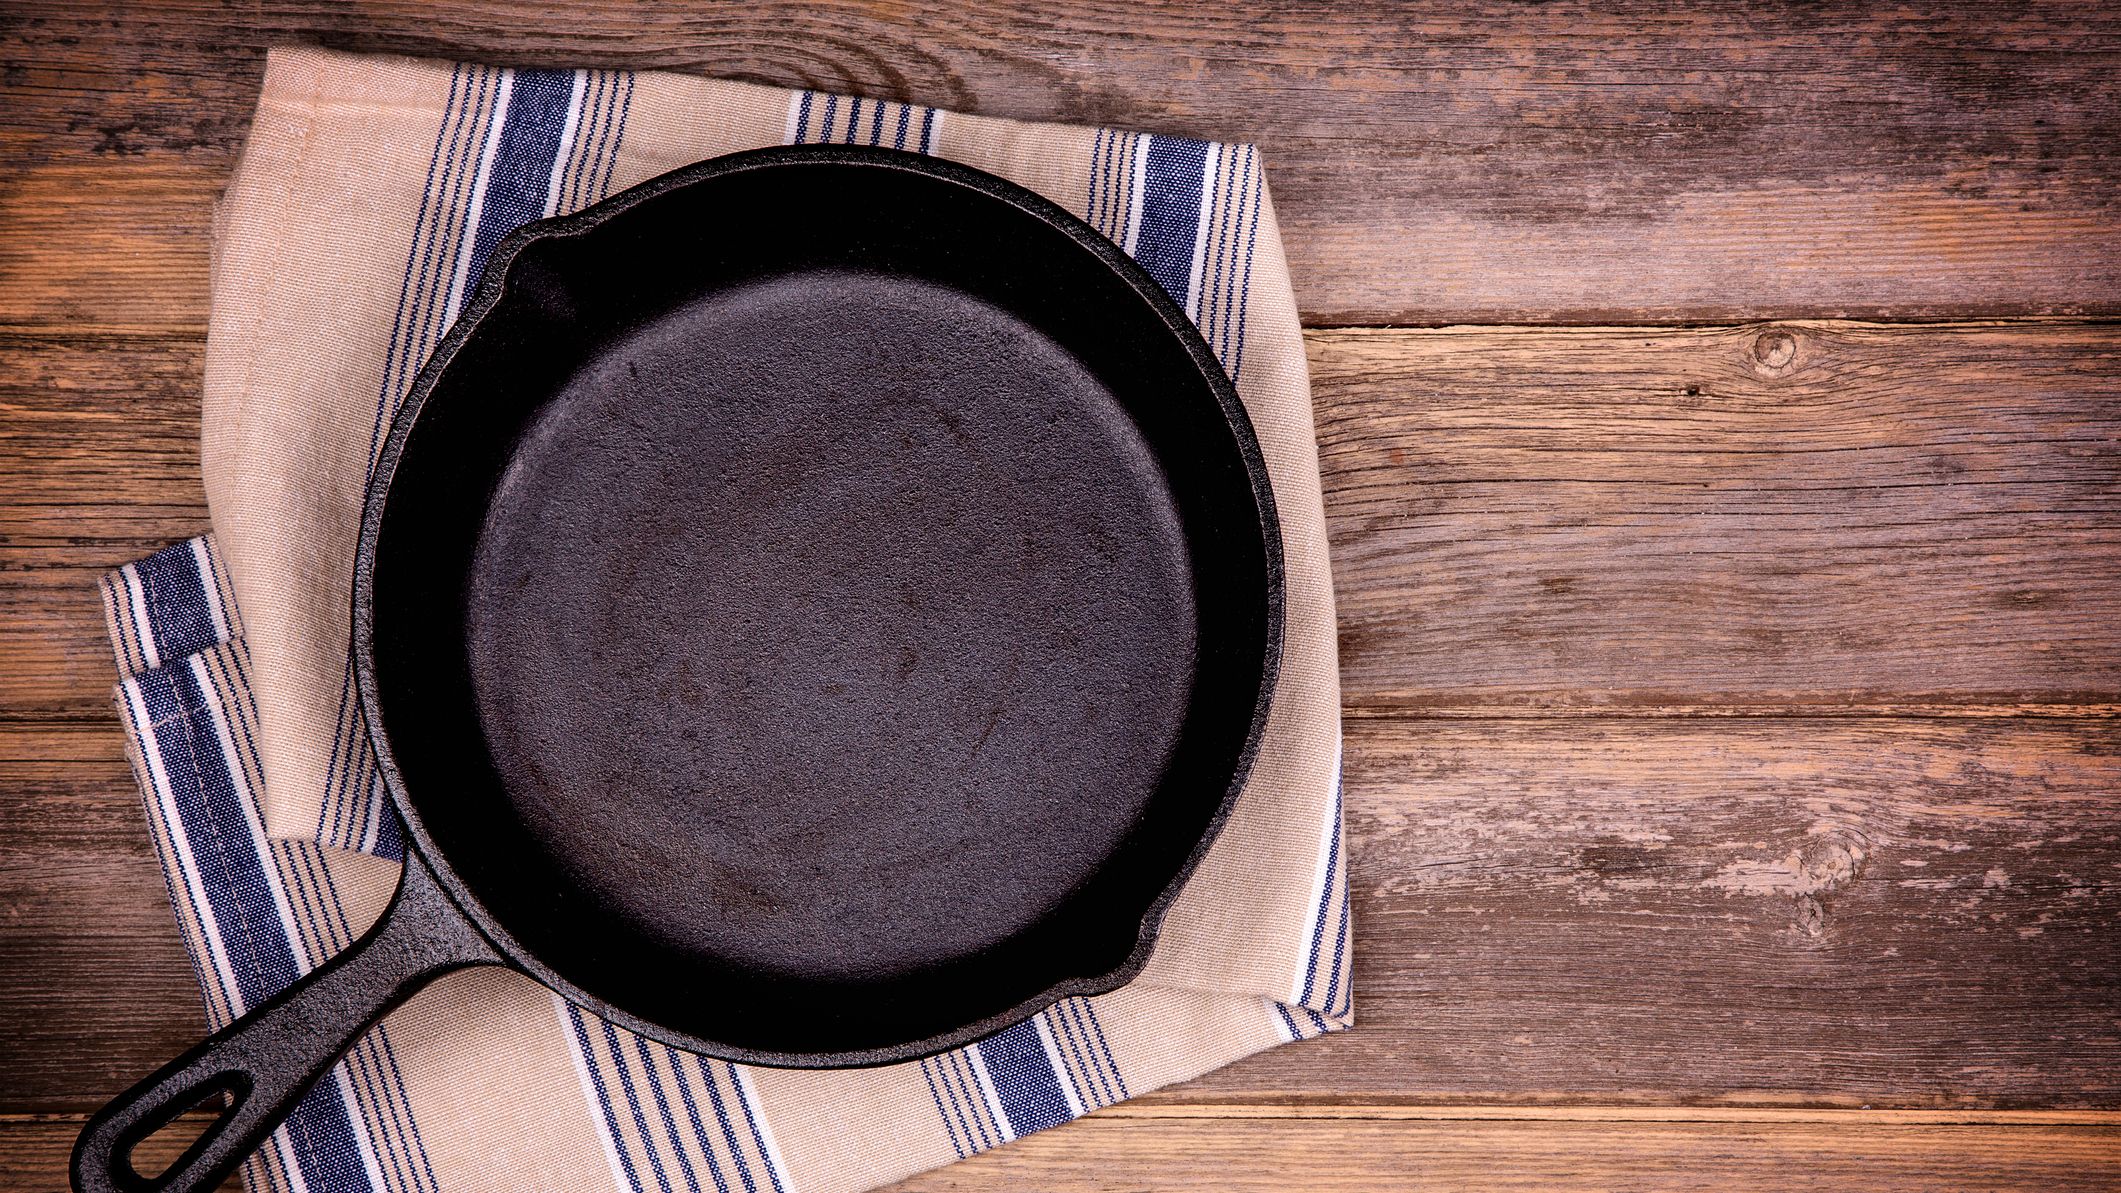 How to Clean a Cast Iron Pan Without Ruining It